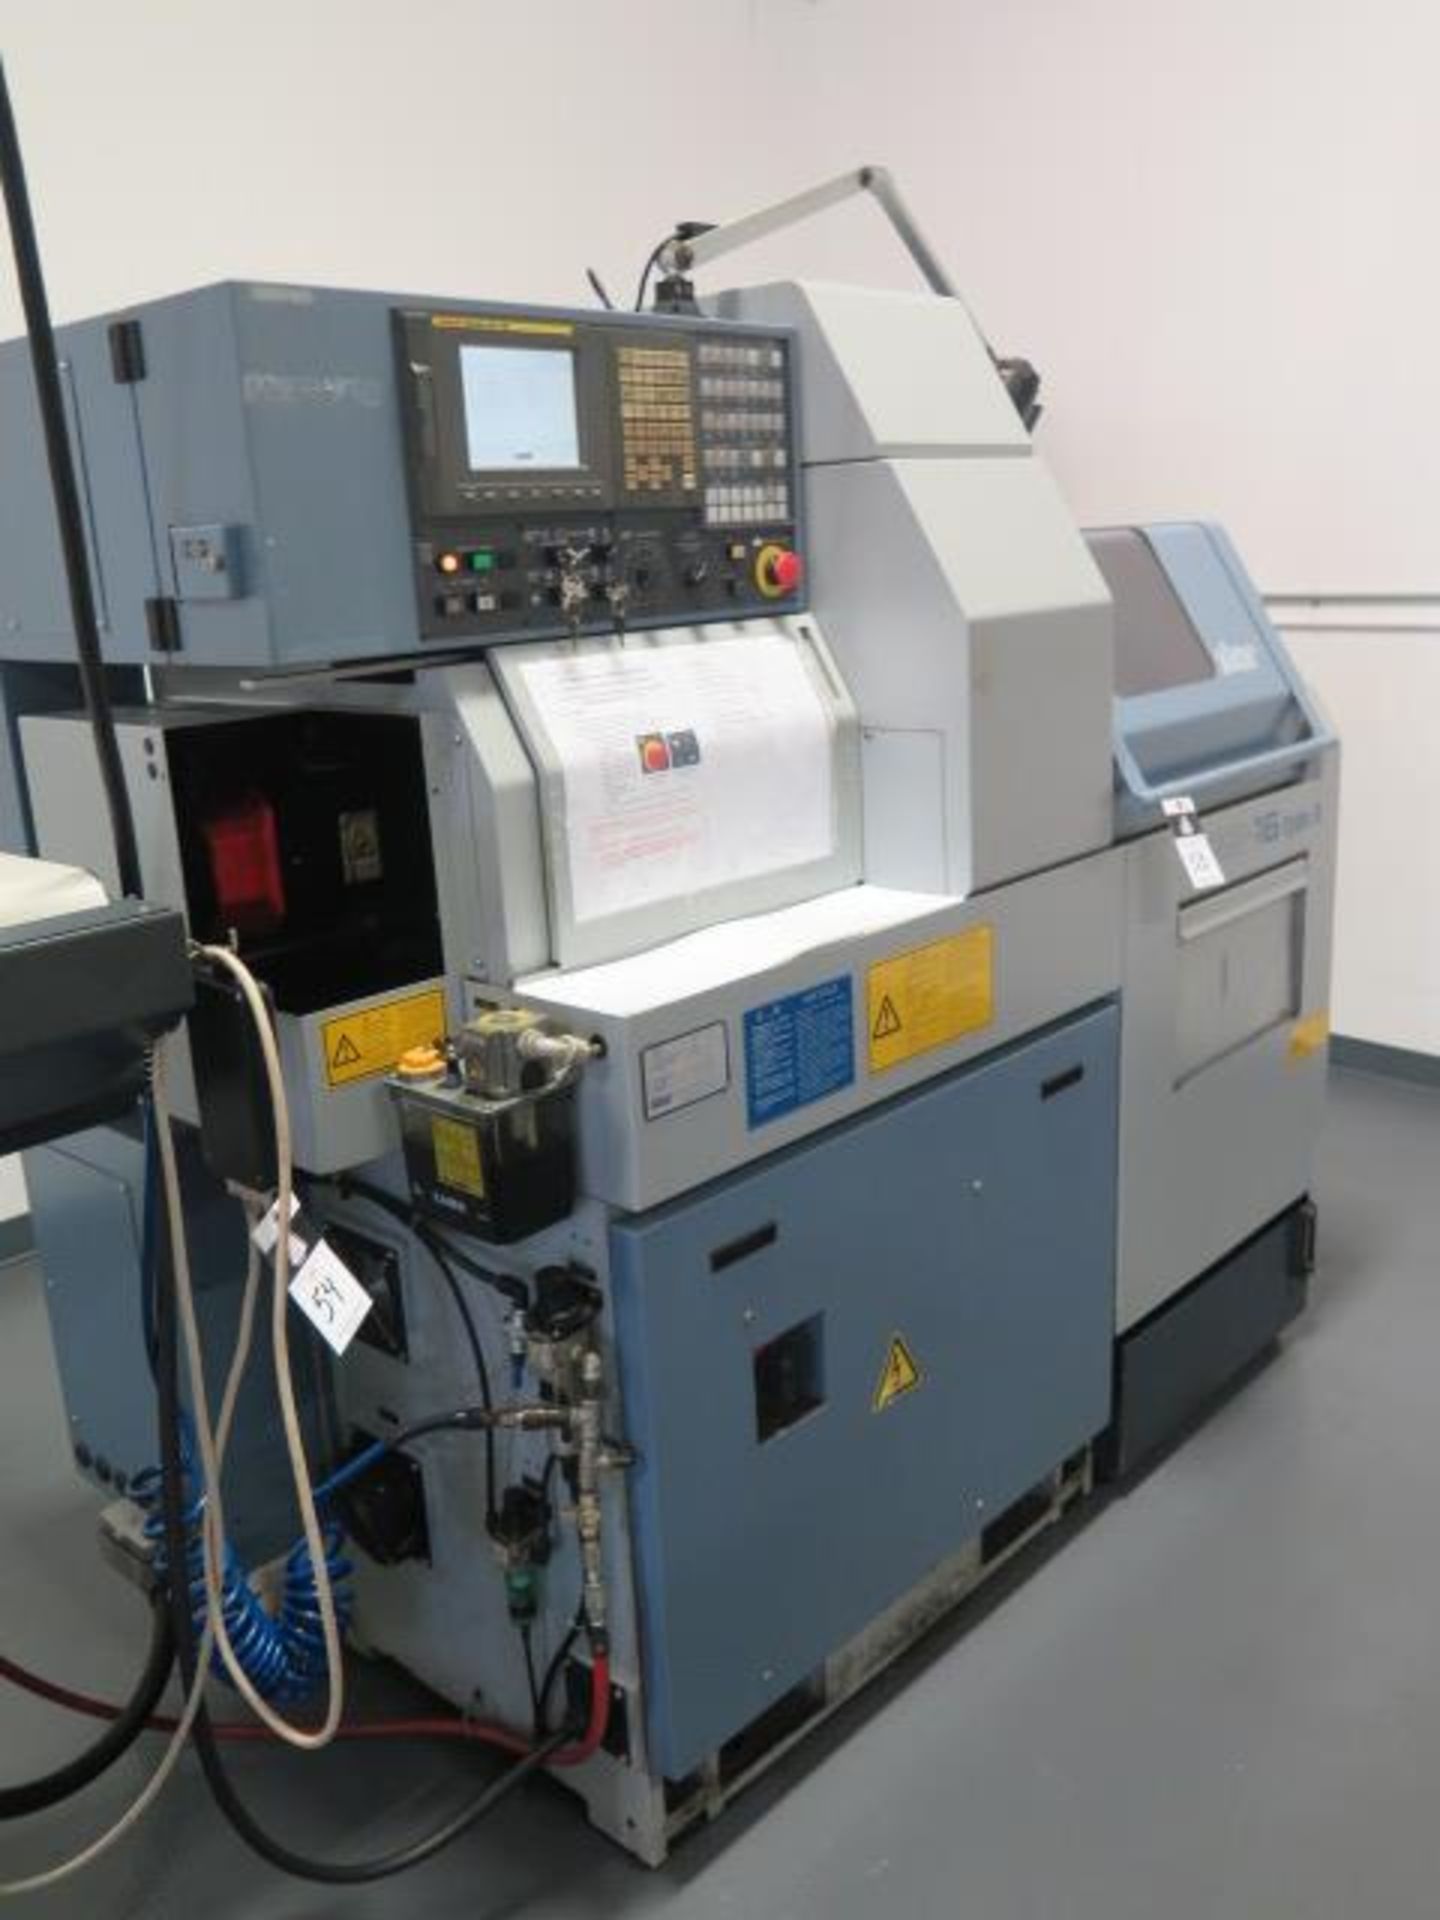 2007 Star SB-16 Twin Spindle CNC Screw Machine w/ Fanuc 18i-TB Controls, Full “C”, SOLD AS IS - Image 3 of 22